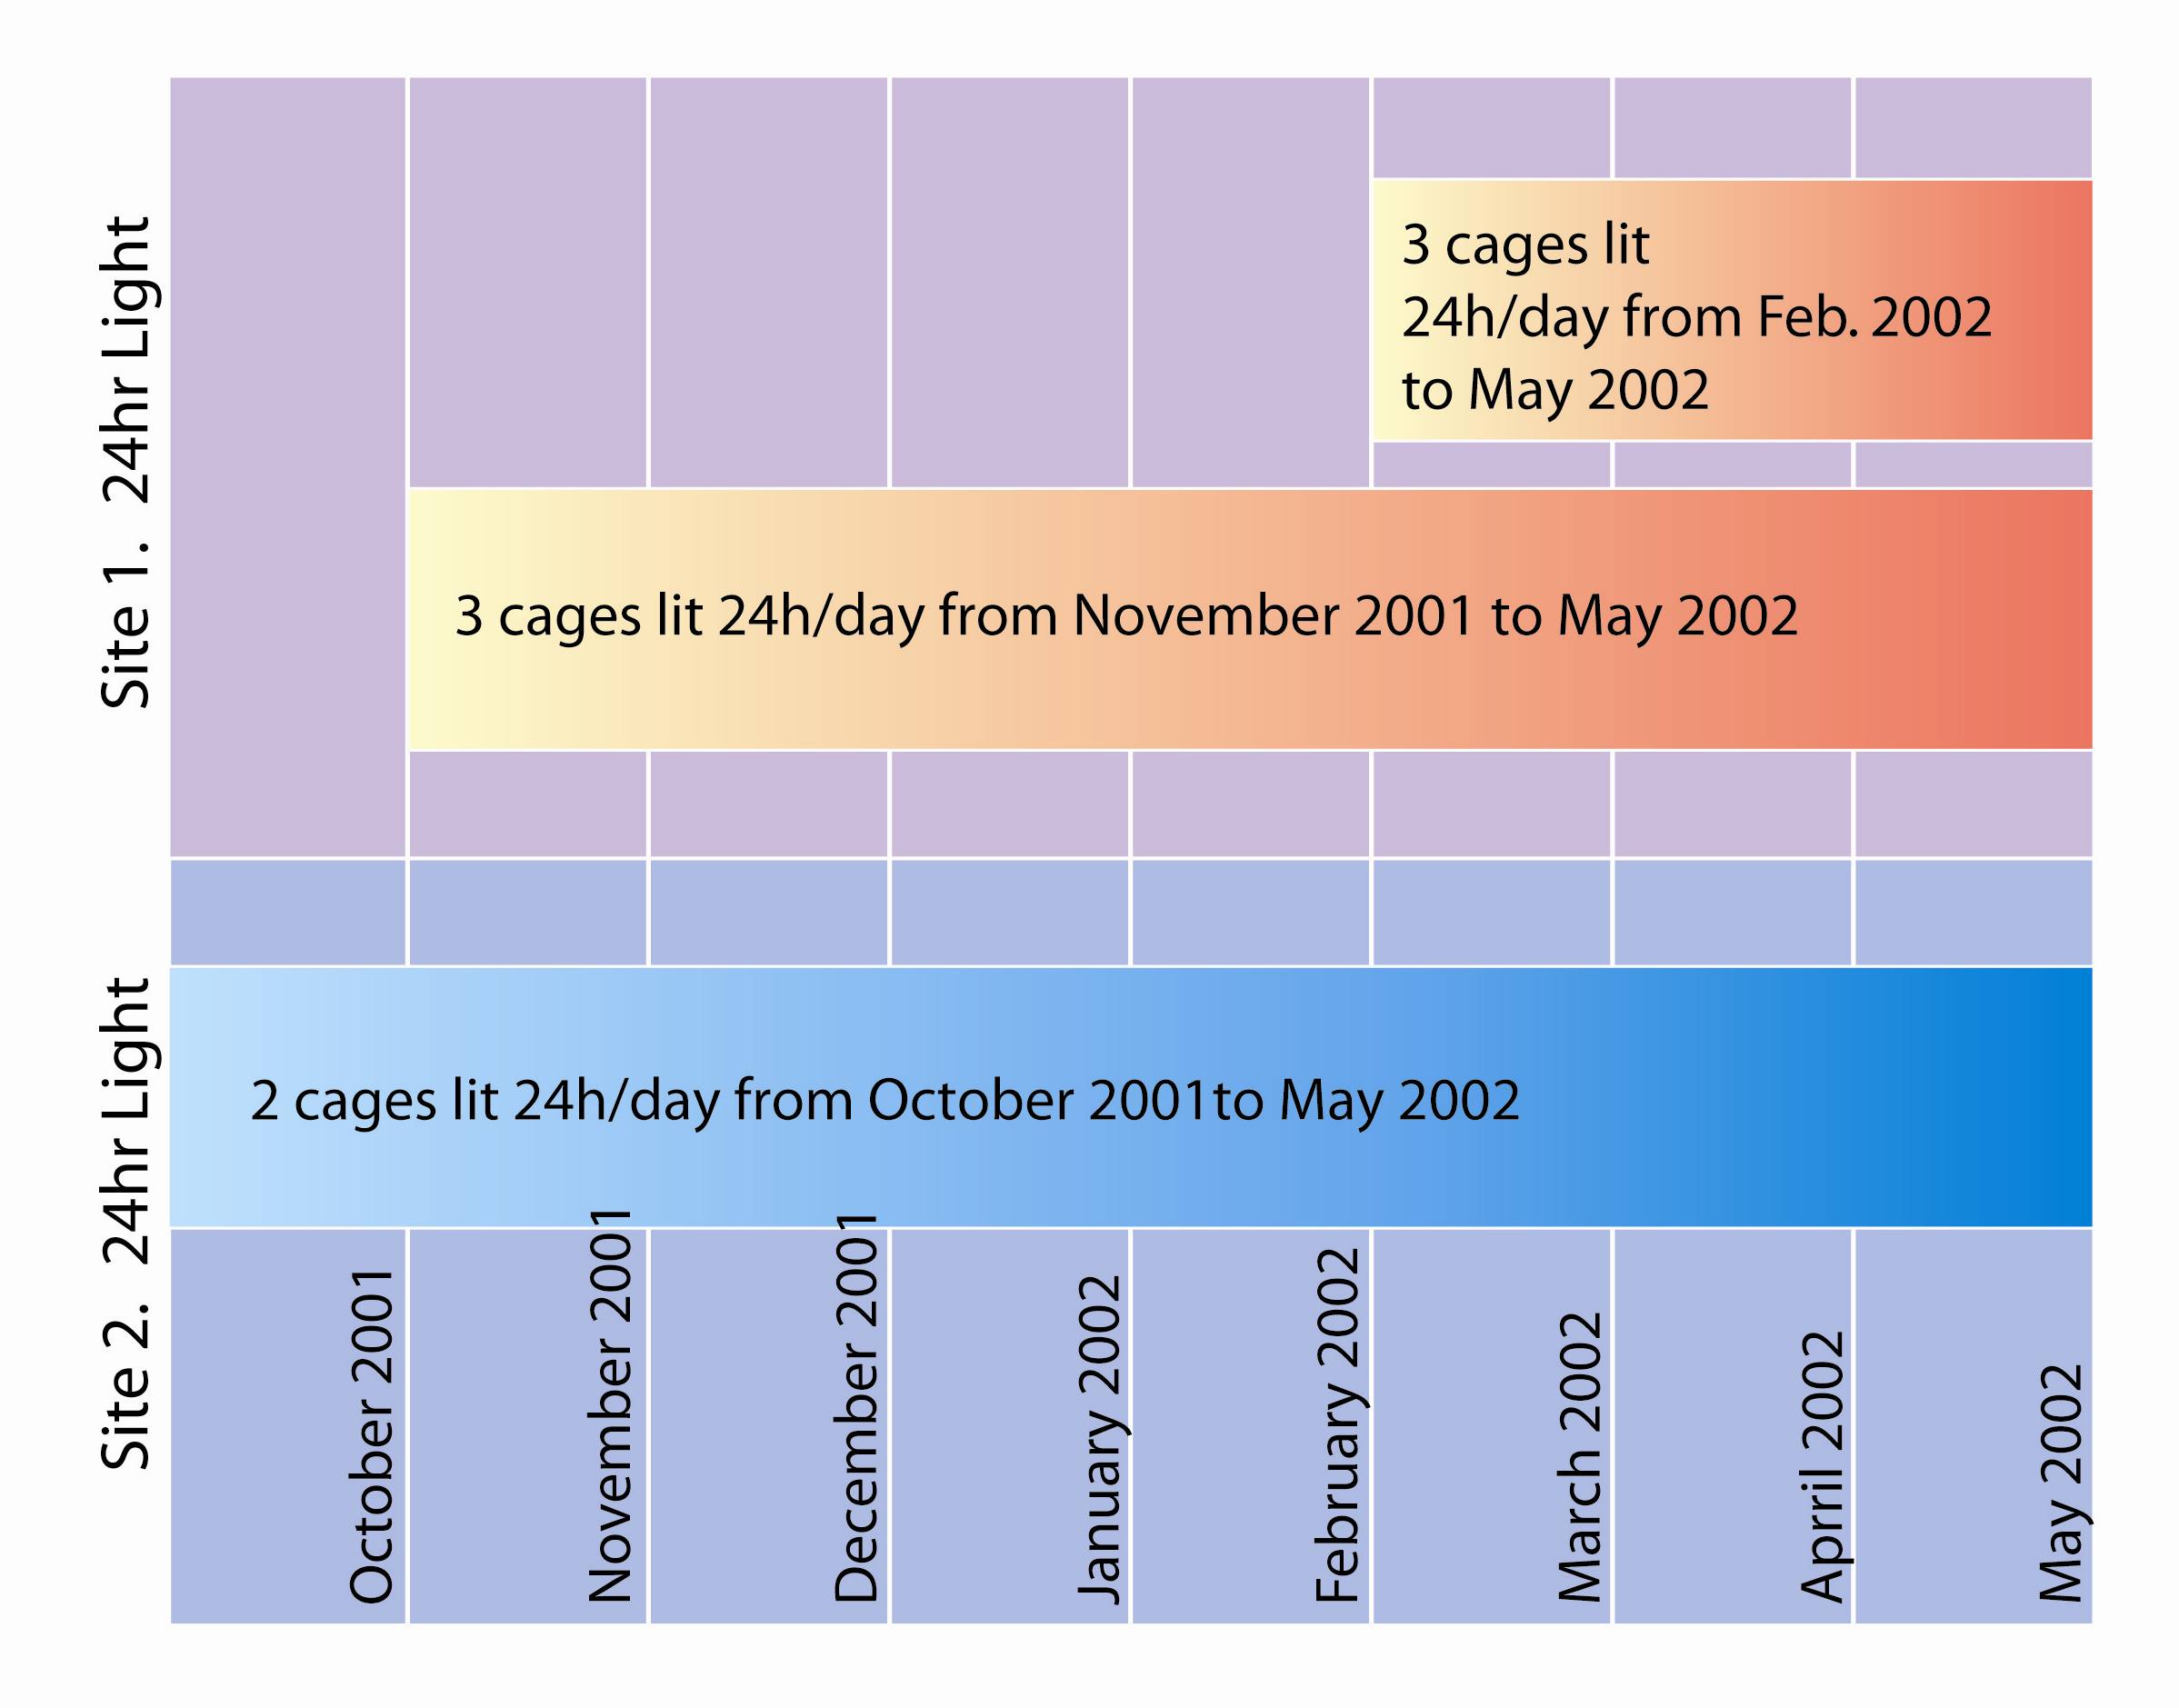 Time line indicating number of months which study cages were exposed to 24 hour light.